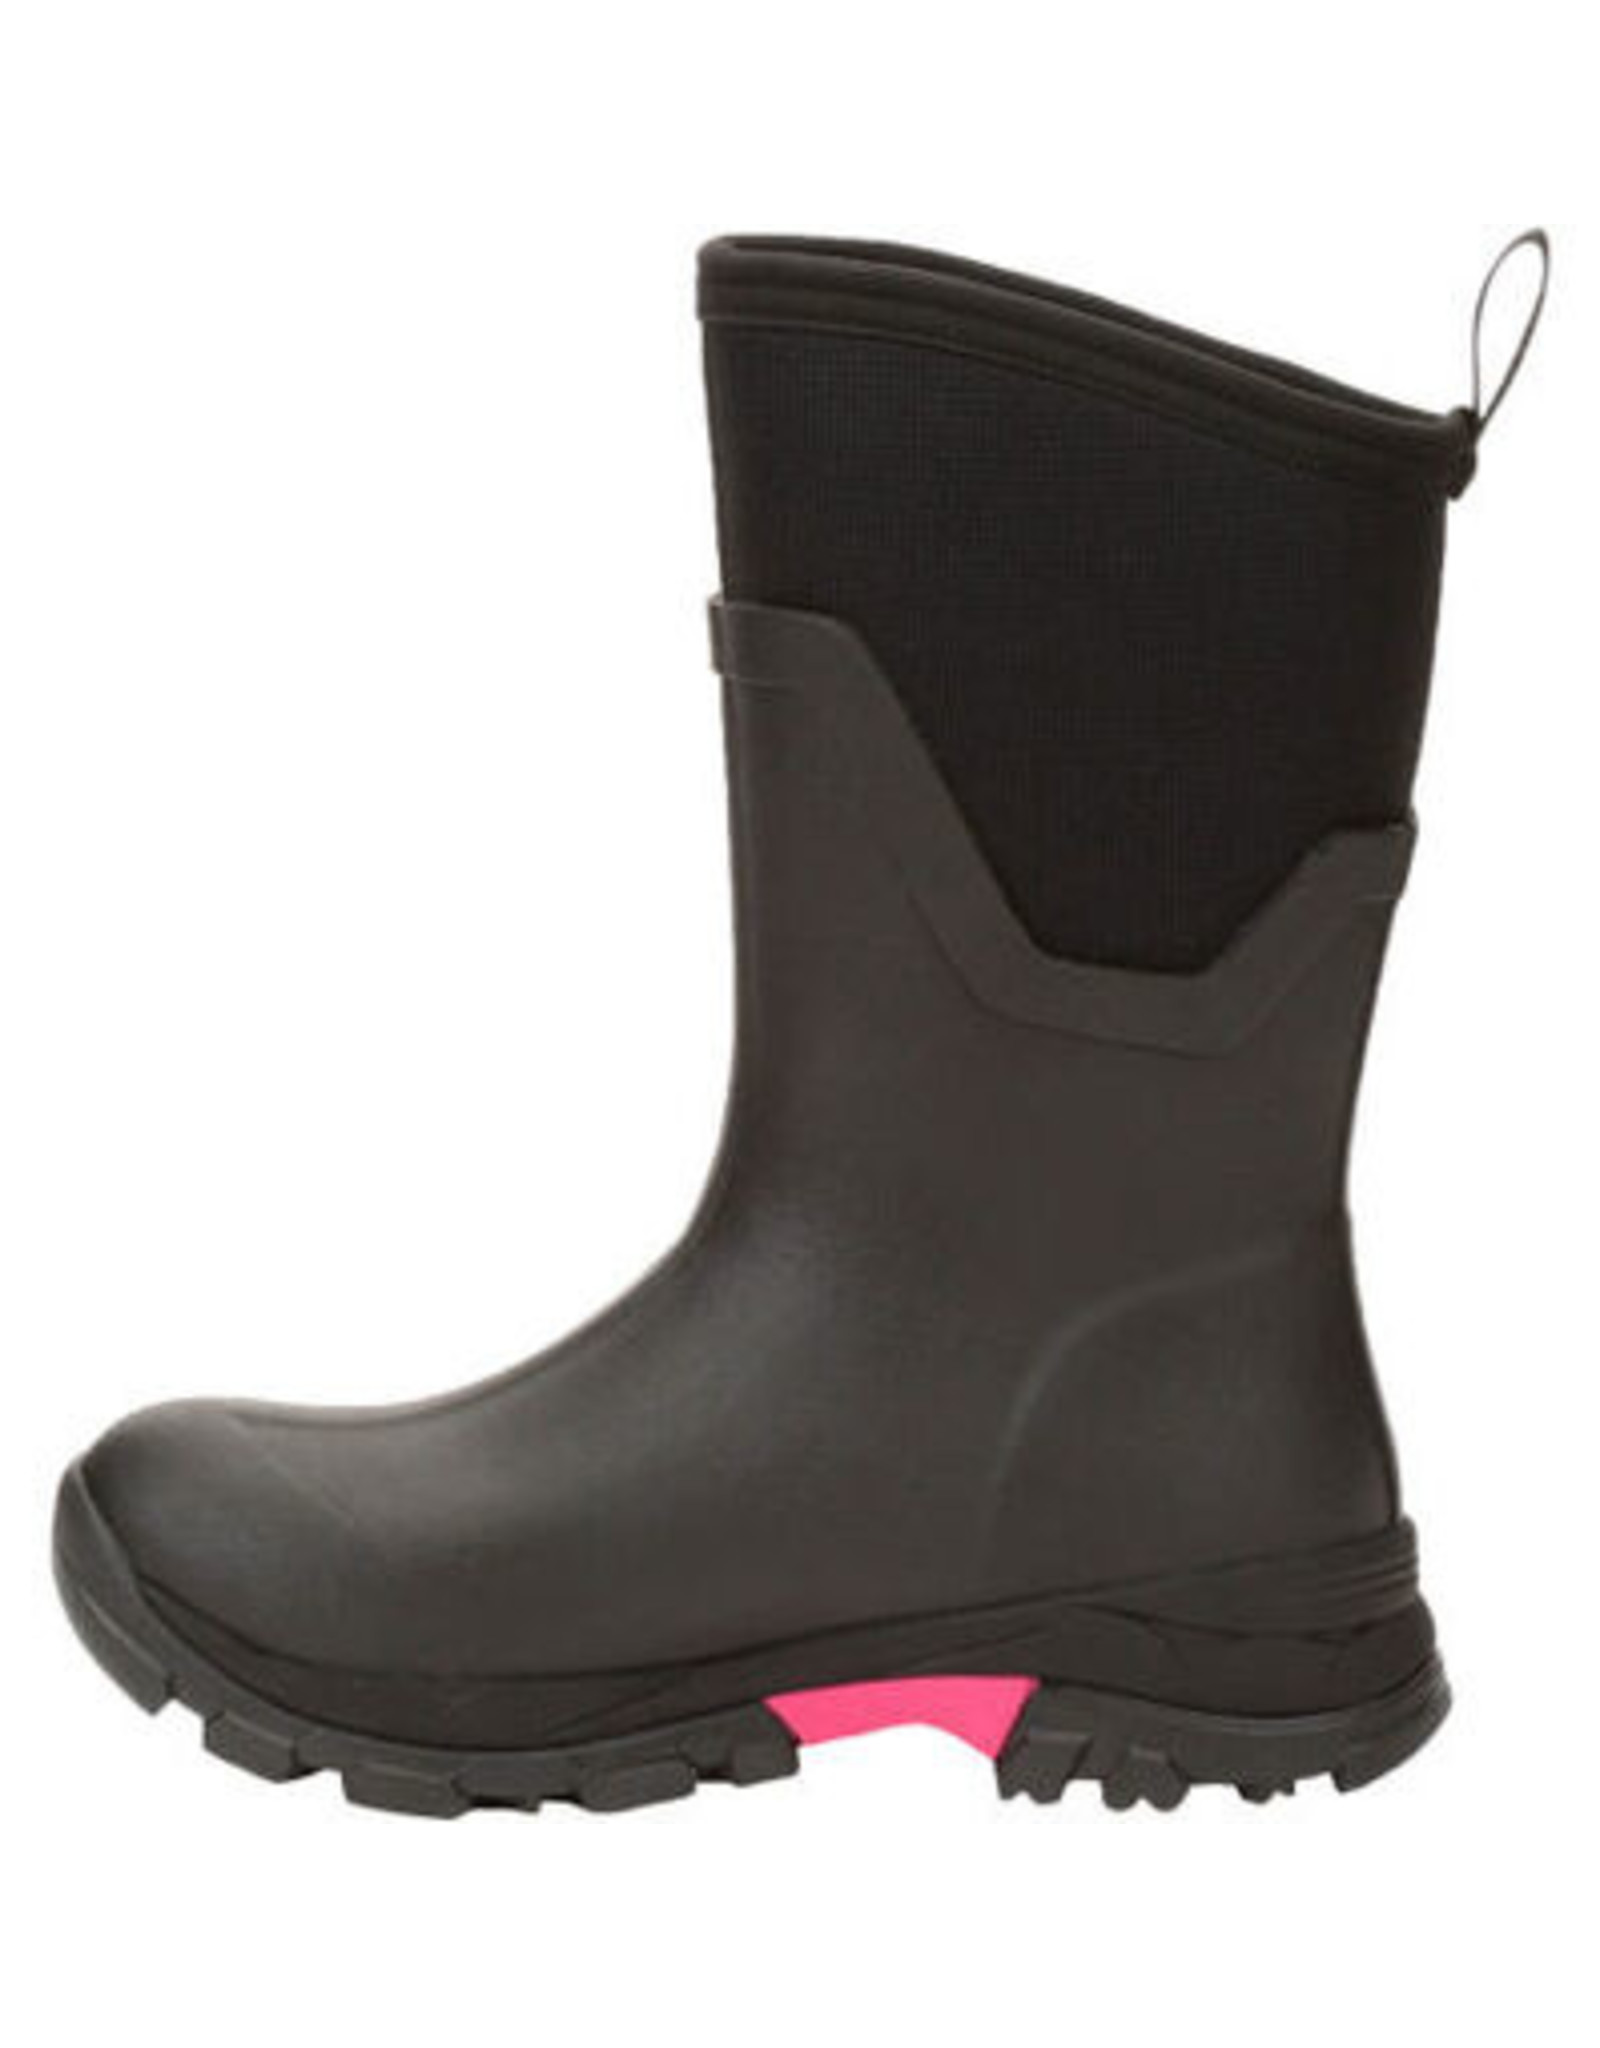 MUCK BOOT COMPANY ARCTIC ICE ARCTIC GRIP A.T. MID